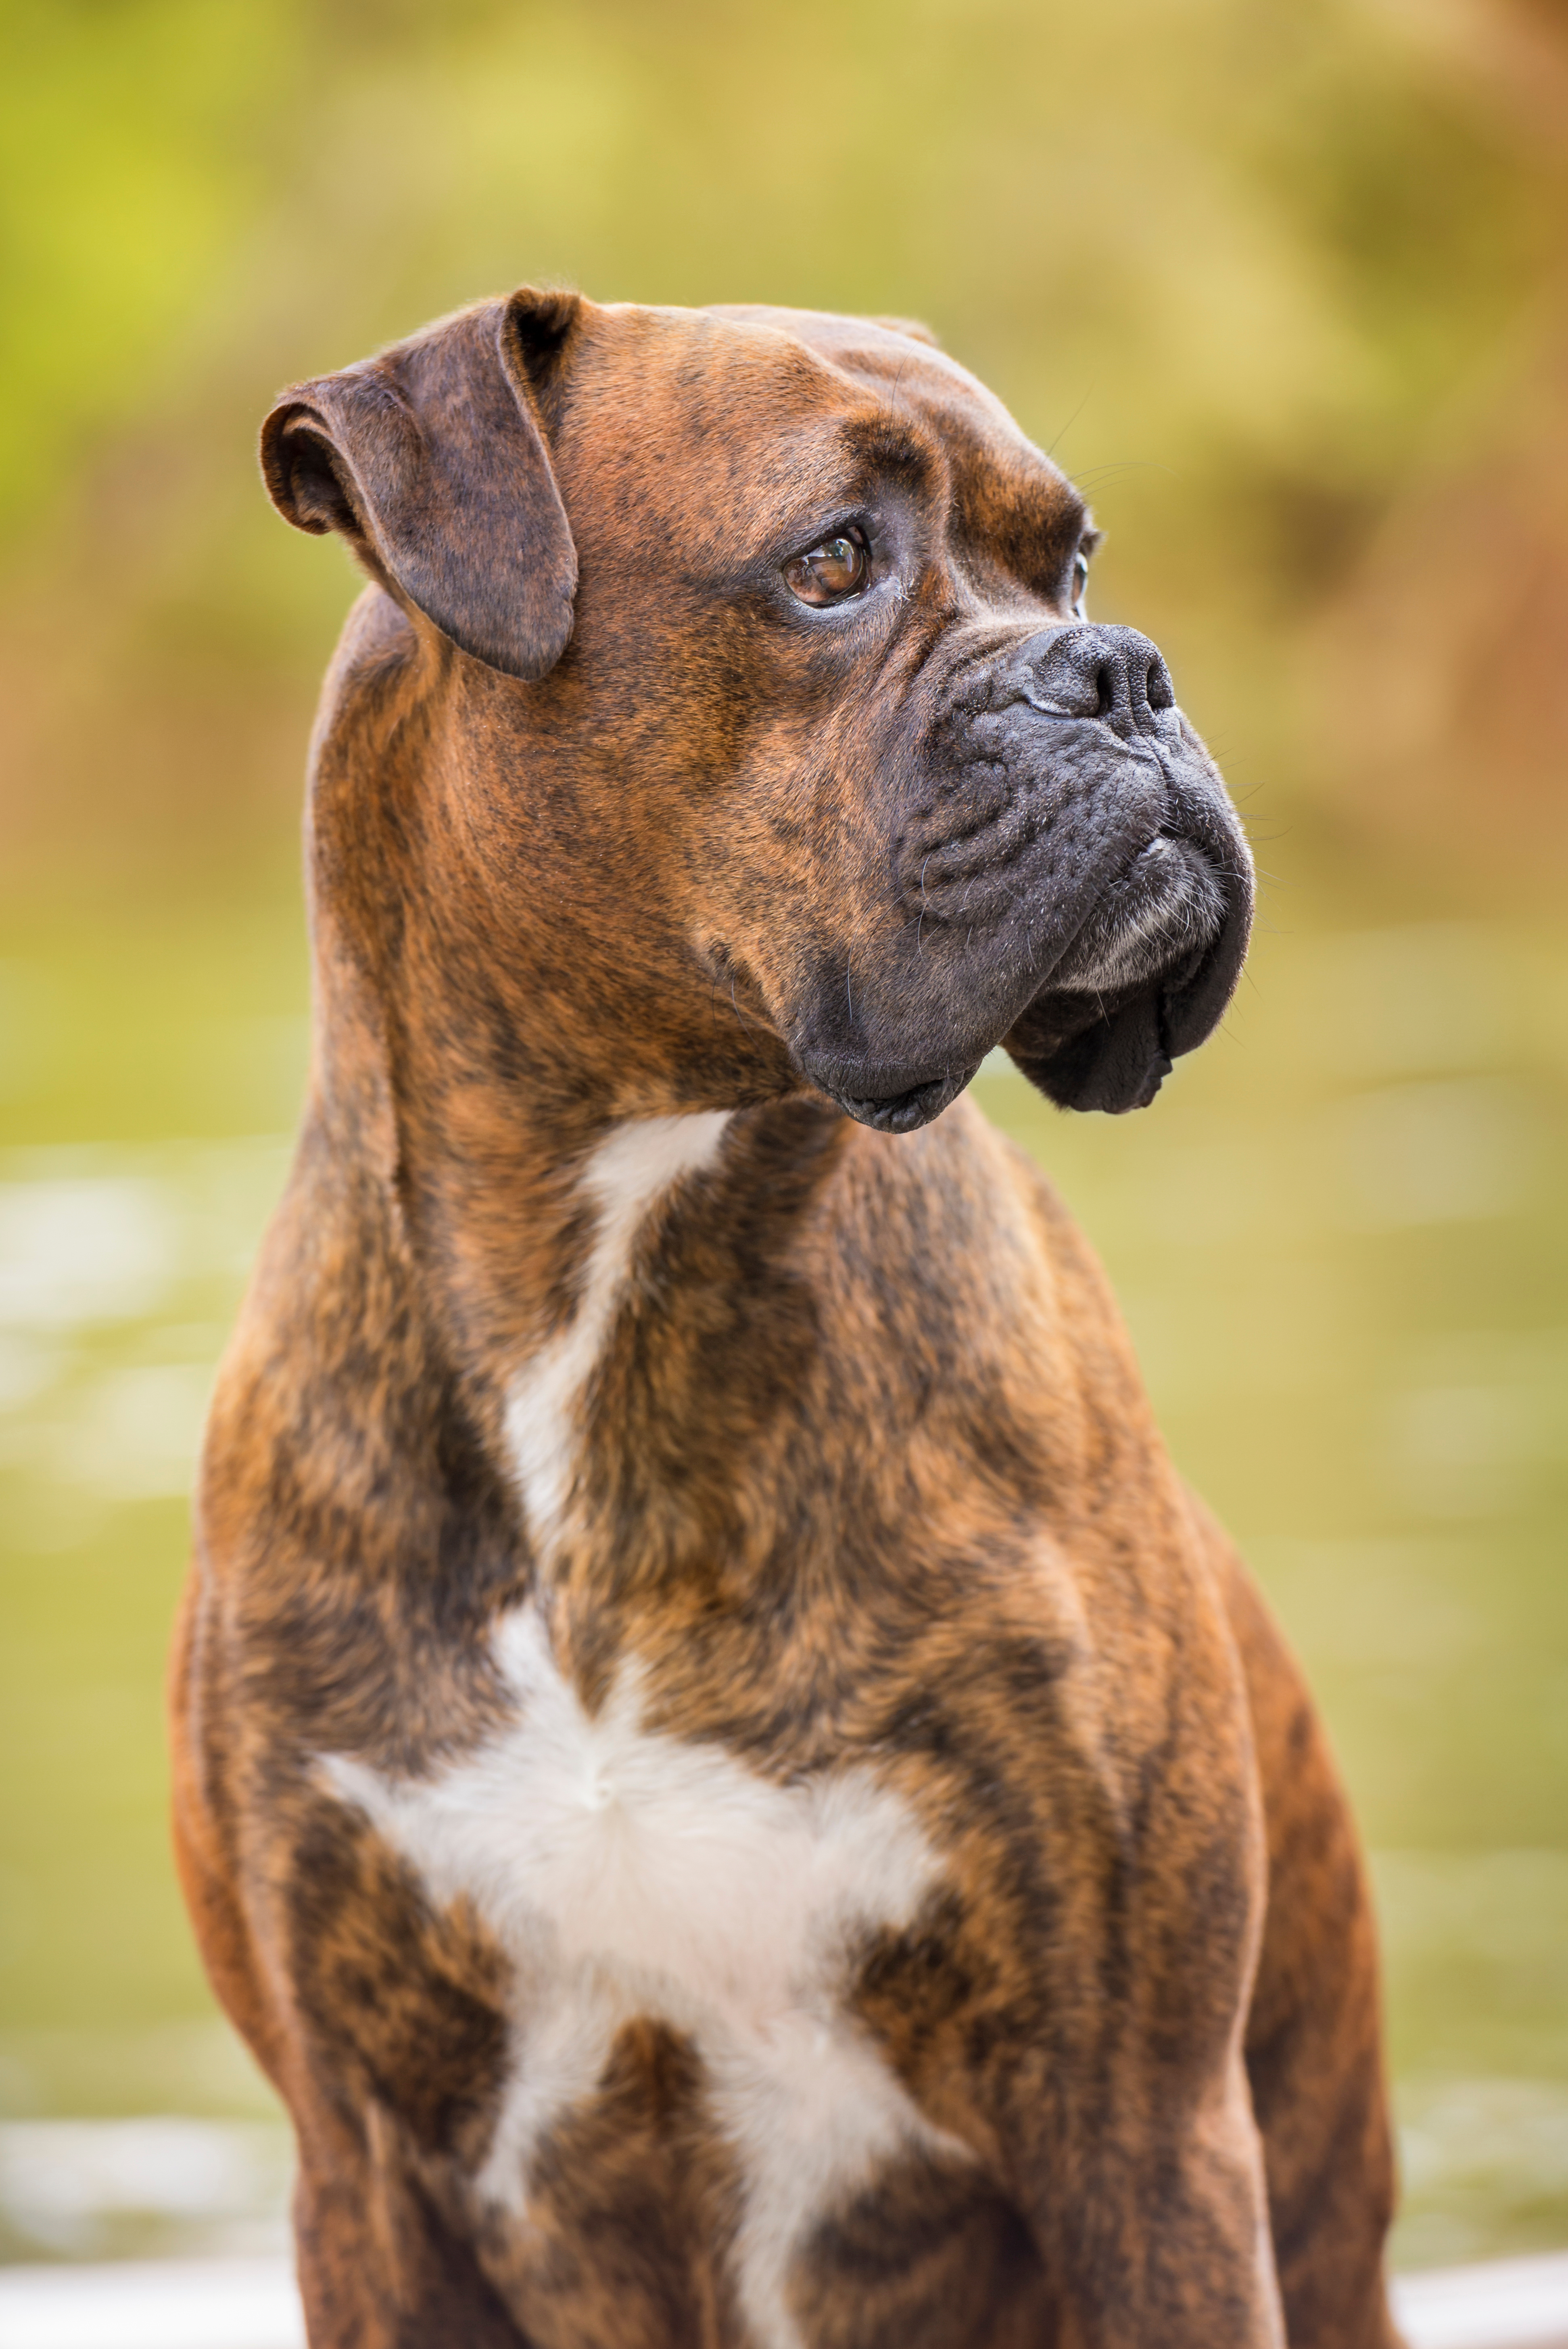 A trained boxer dog - Dog Training Elite of the NC Triangle is the best choice for boxer dog training in Raleigh / Cary, NC!